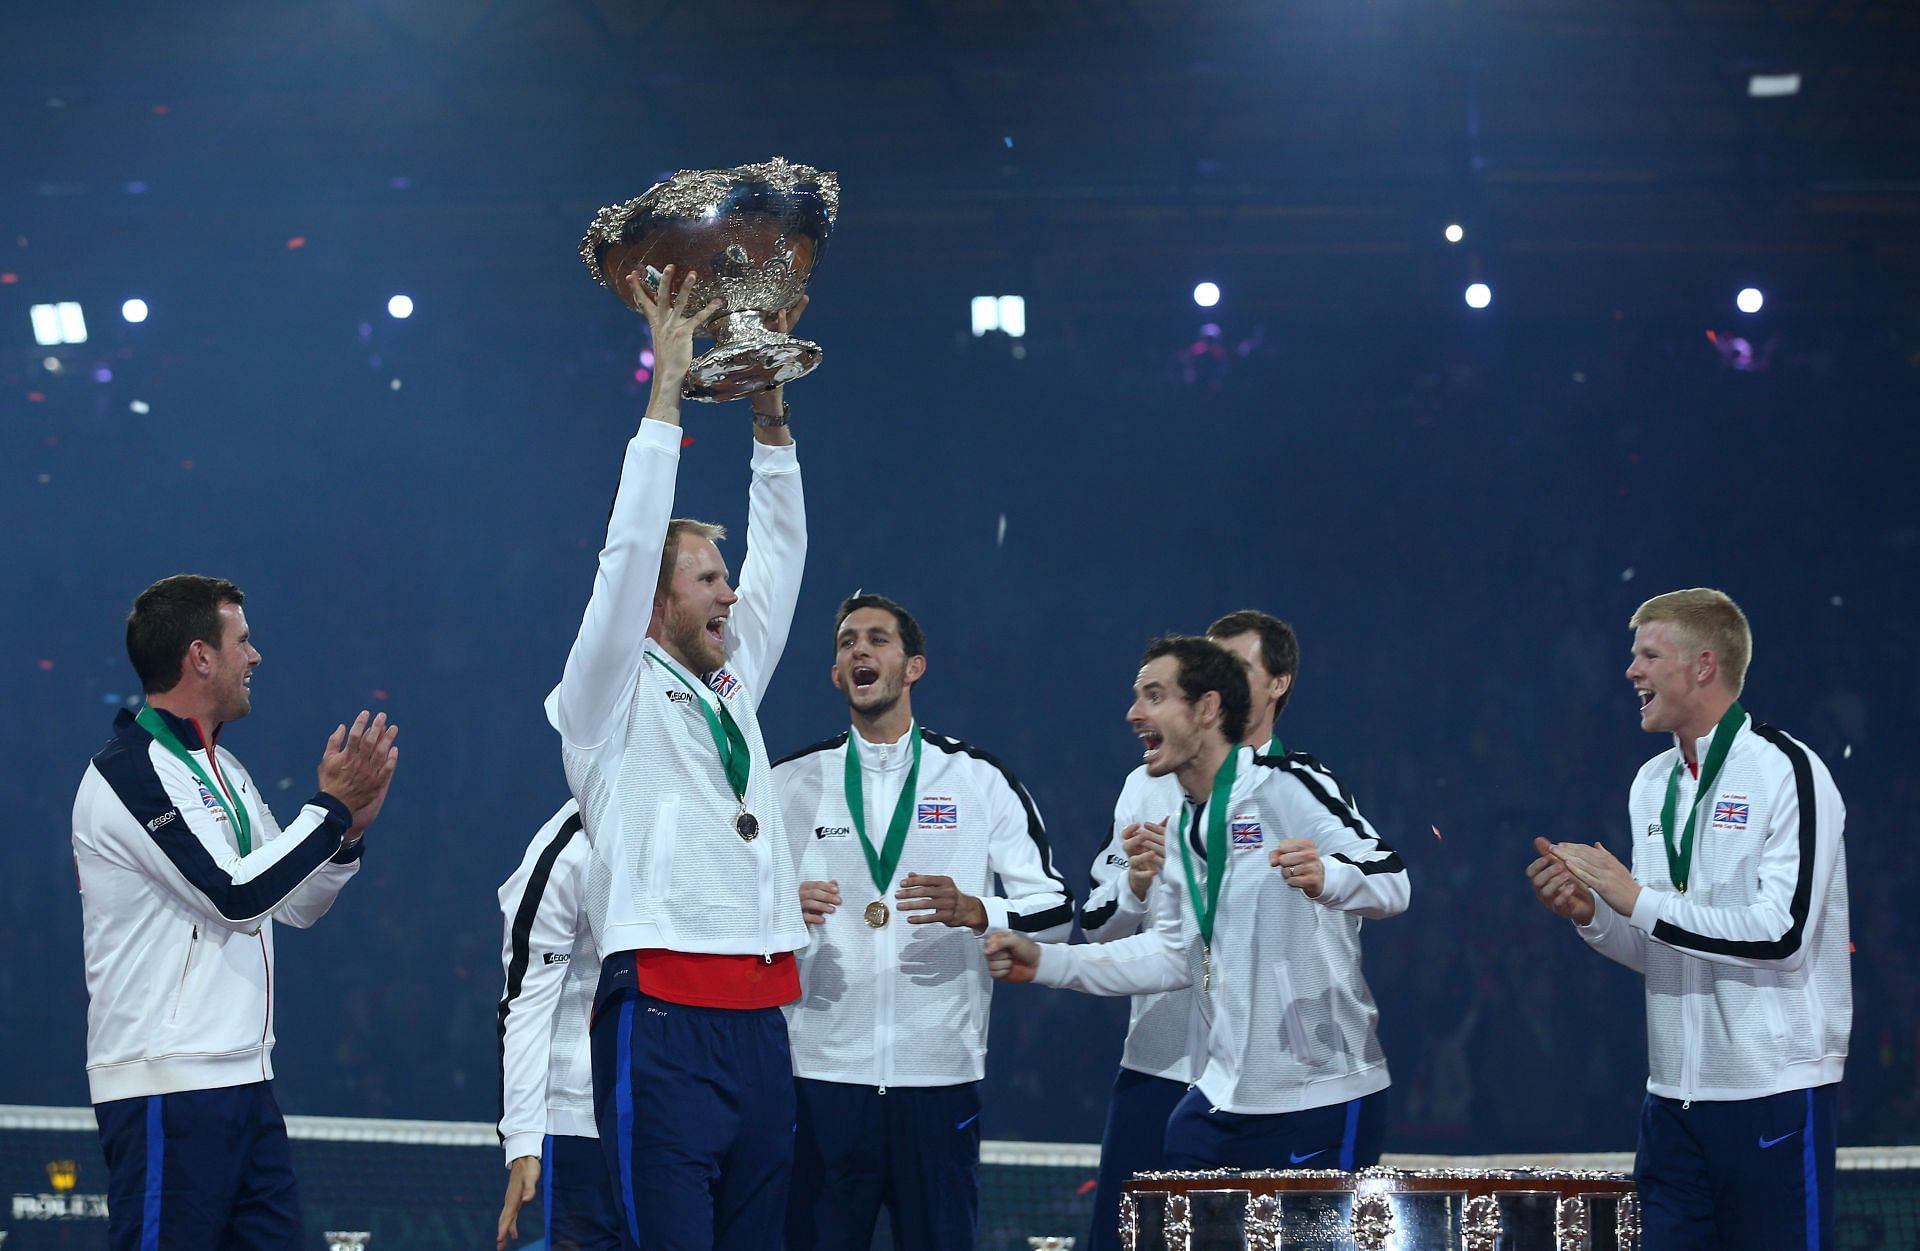 Great Britain won the Davis Cup in 2015 after 79 years